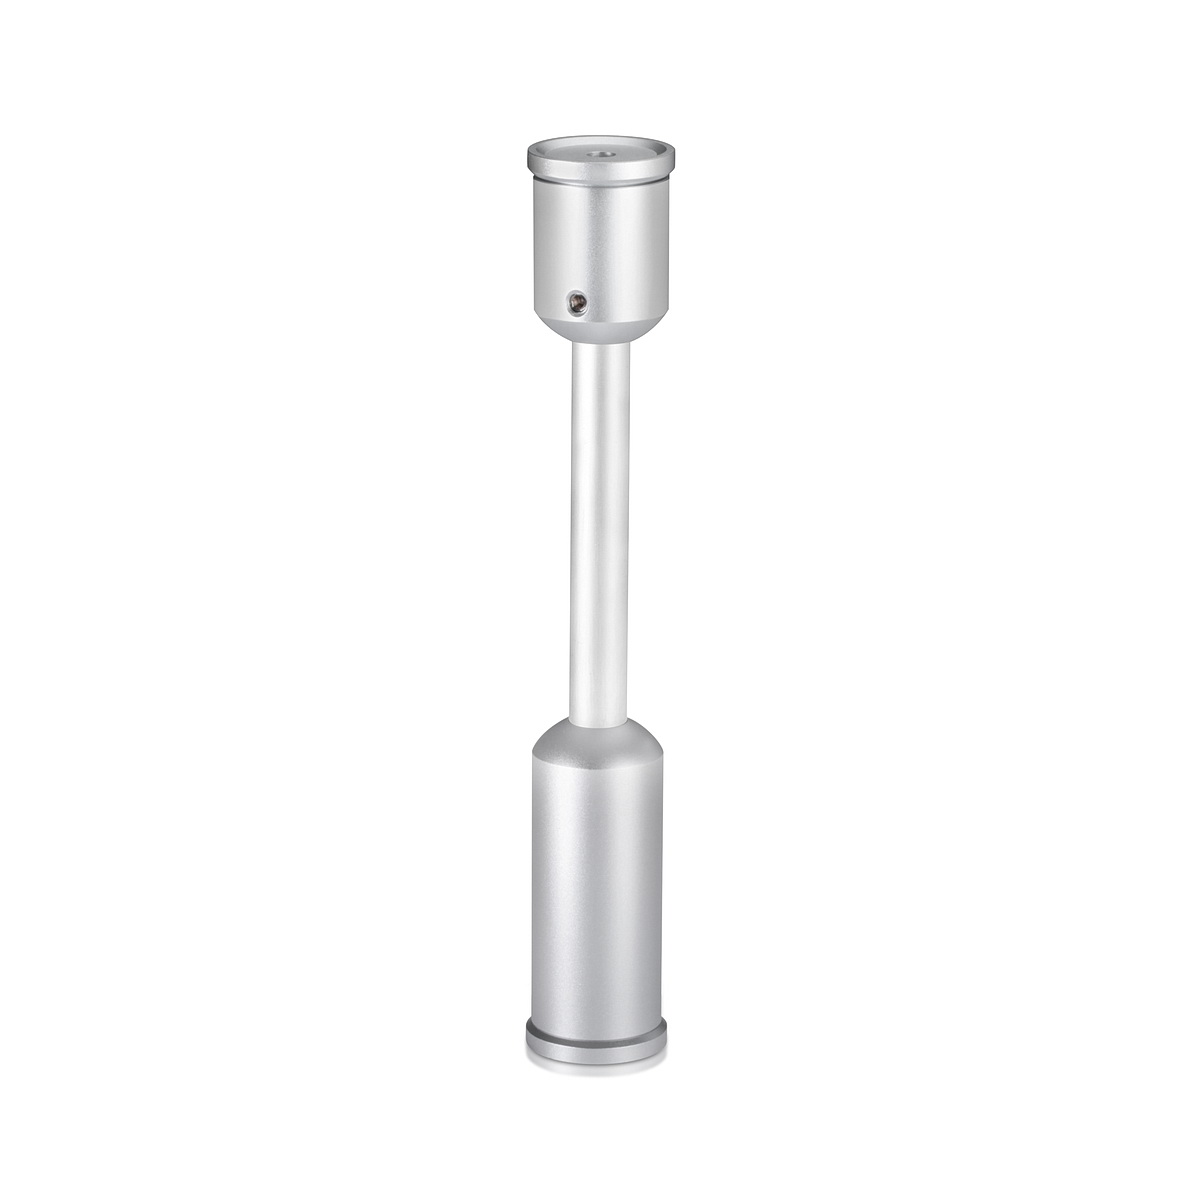 Ceiling to Floor Kit, Aluminum Clear Anodized, For 3/8'' Diameter Rod ROD310A (M6 Reverse Thread)  (Sold without Rod)